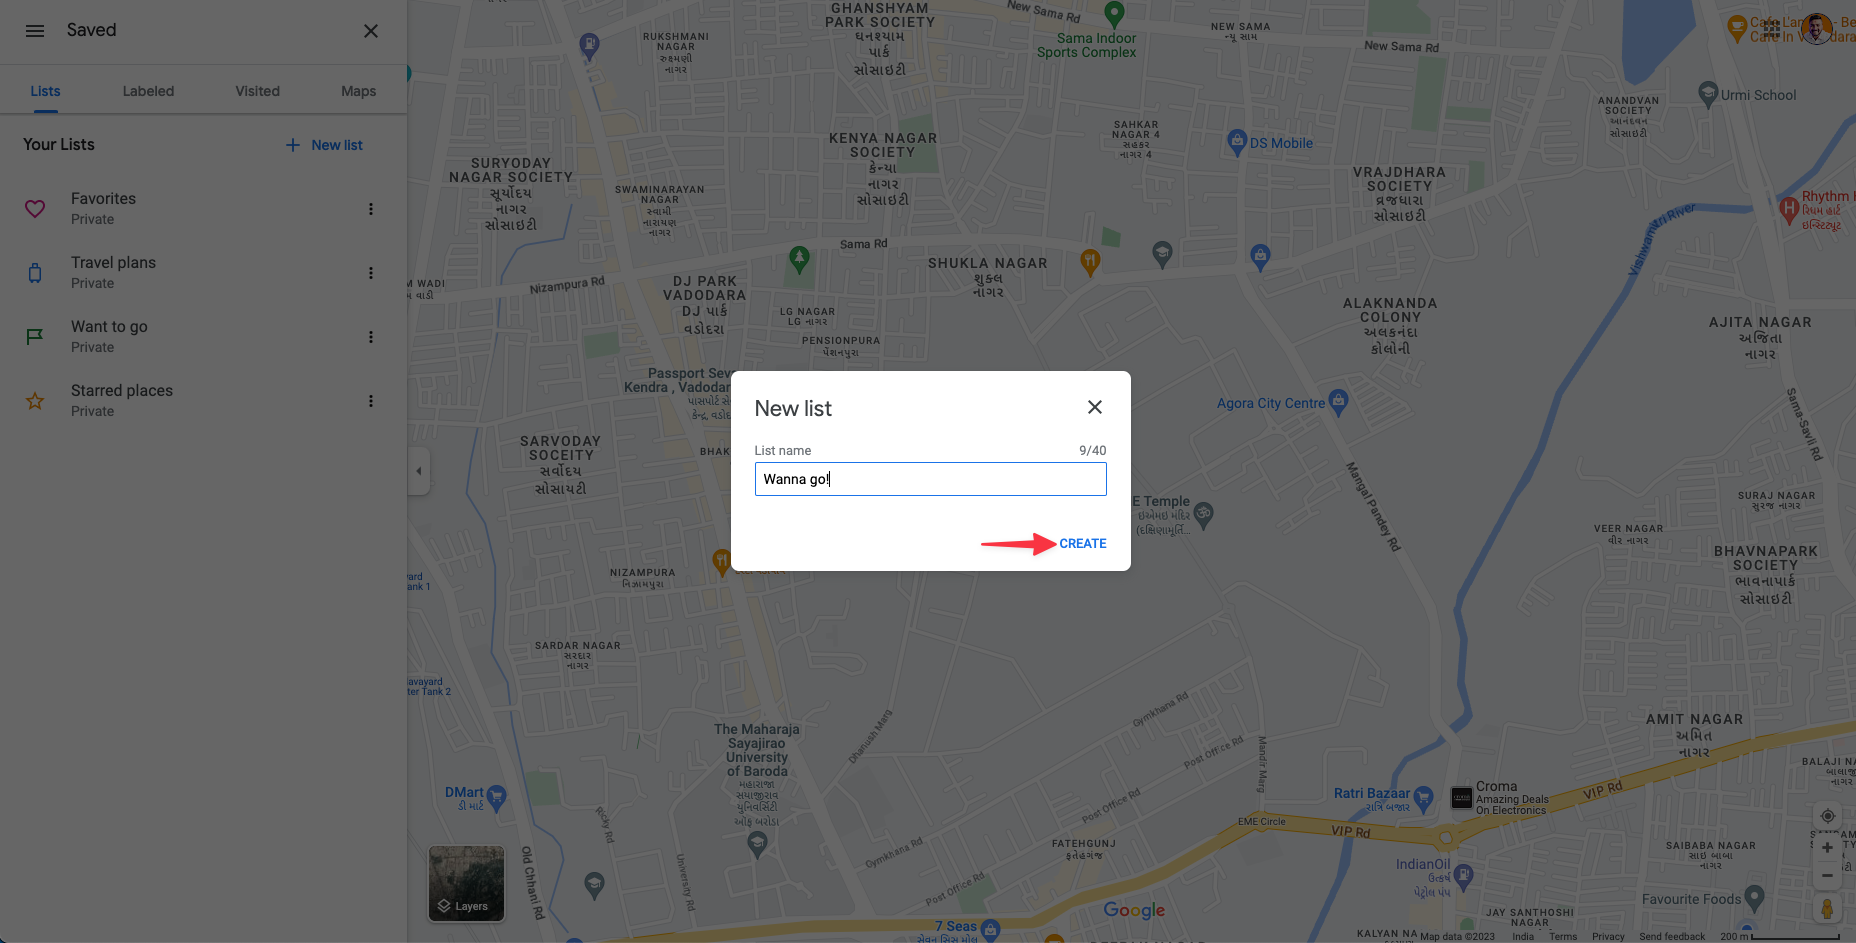 Remote.tools shows how to create a new list on Google maps